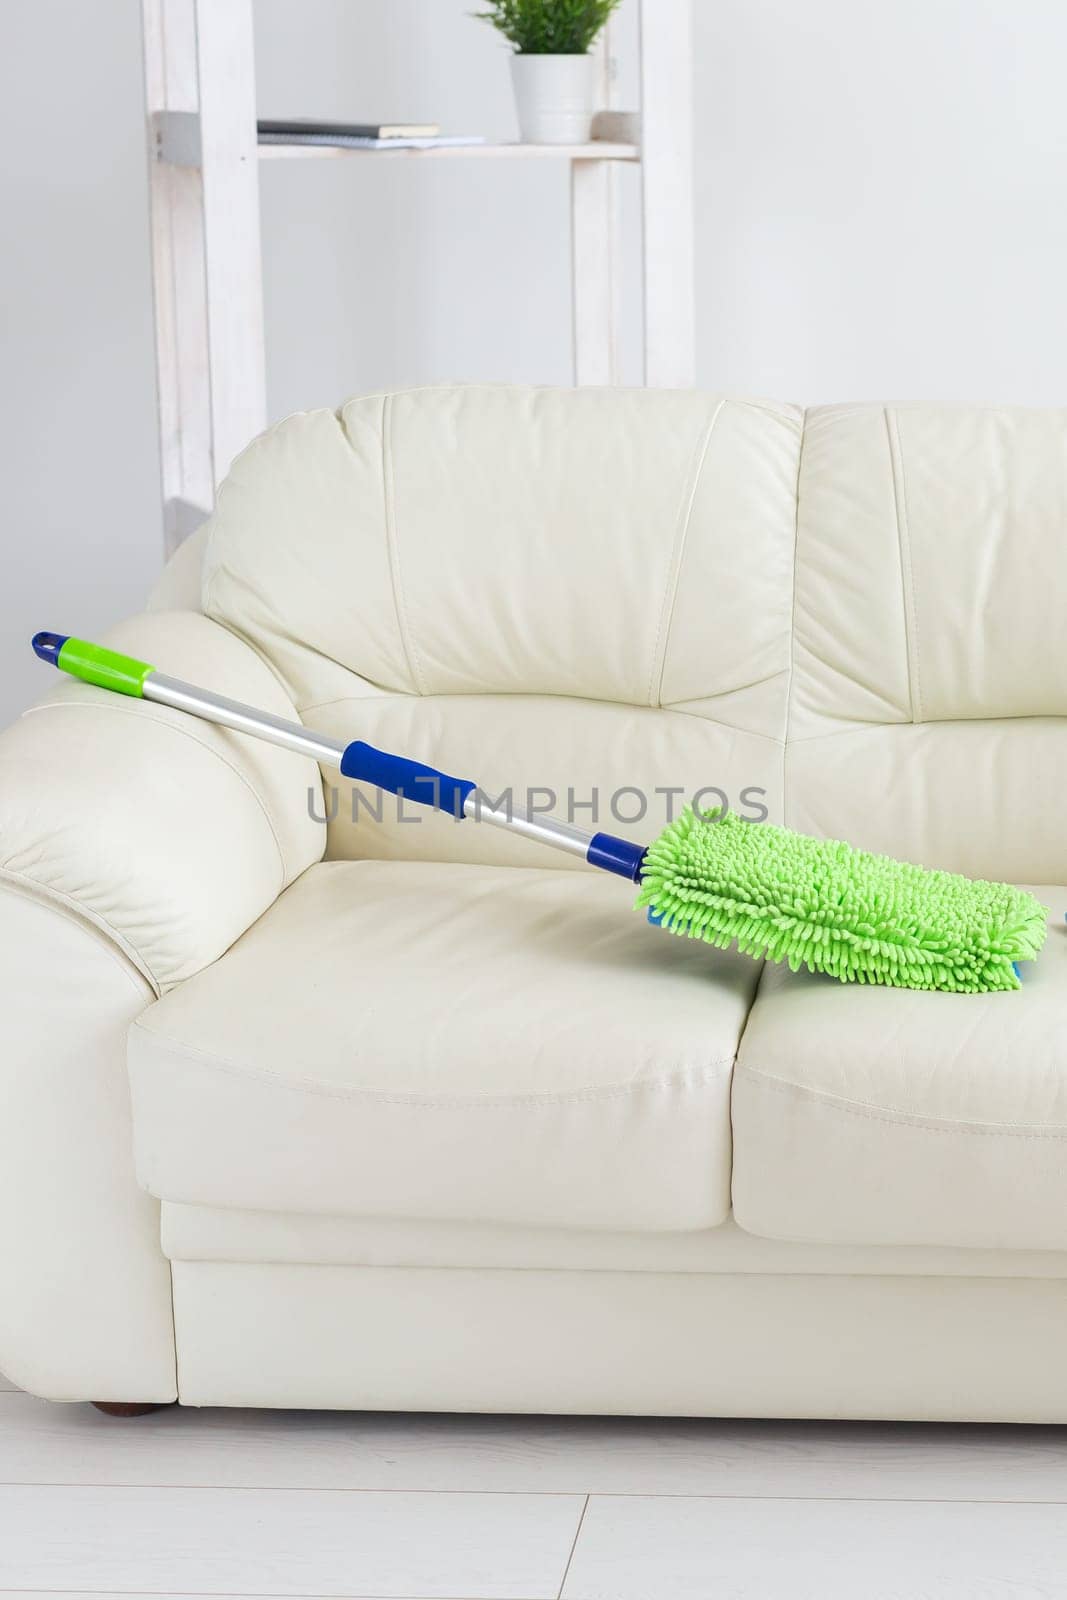 New clean green microfiber mop floor wiper cleaning sweeping tool lying on sofa - tools for cleaning services and domestic work housekeeping by Satura86